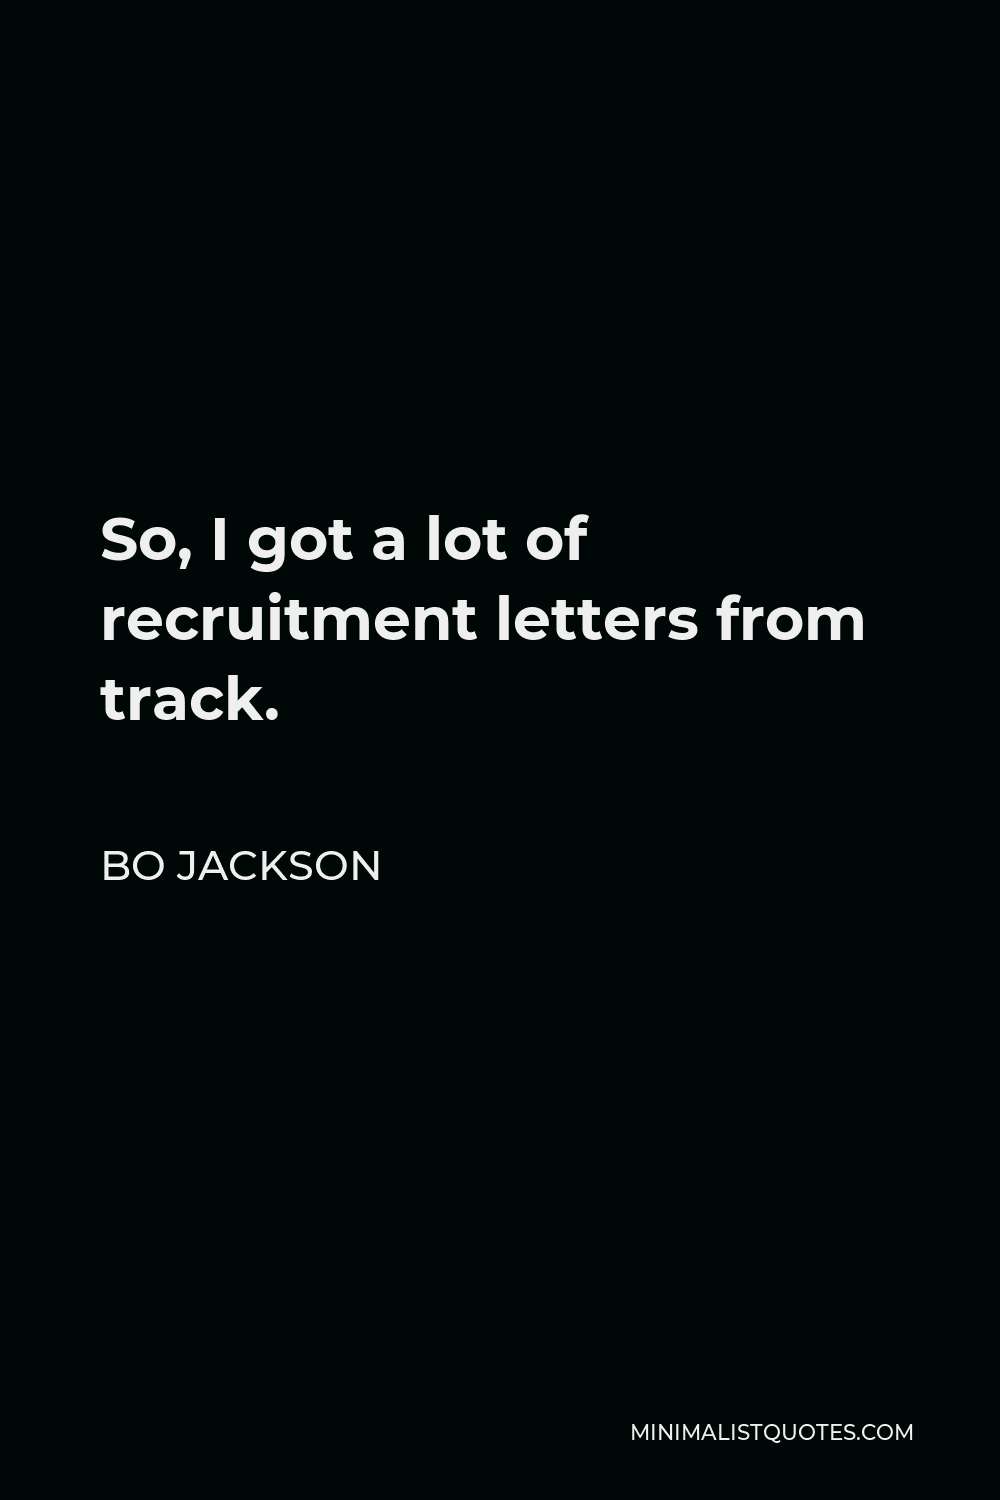 Bo Jackson Quote - So, I got a lot of recruitment letters from track.